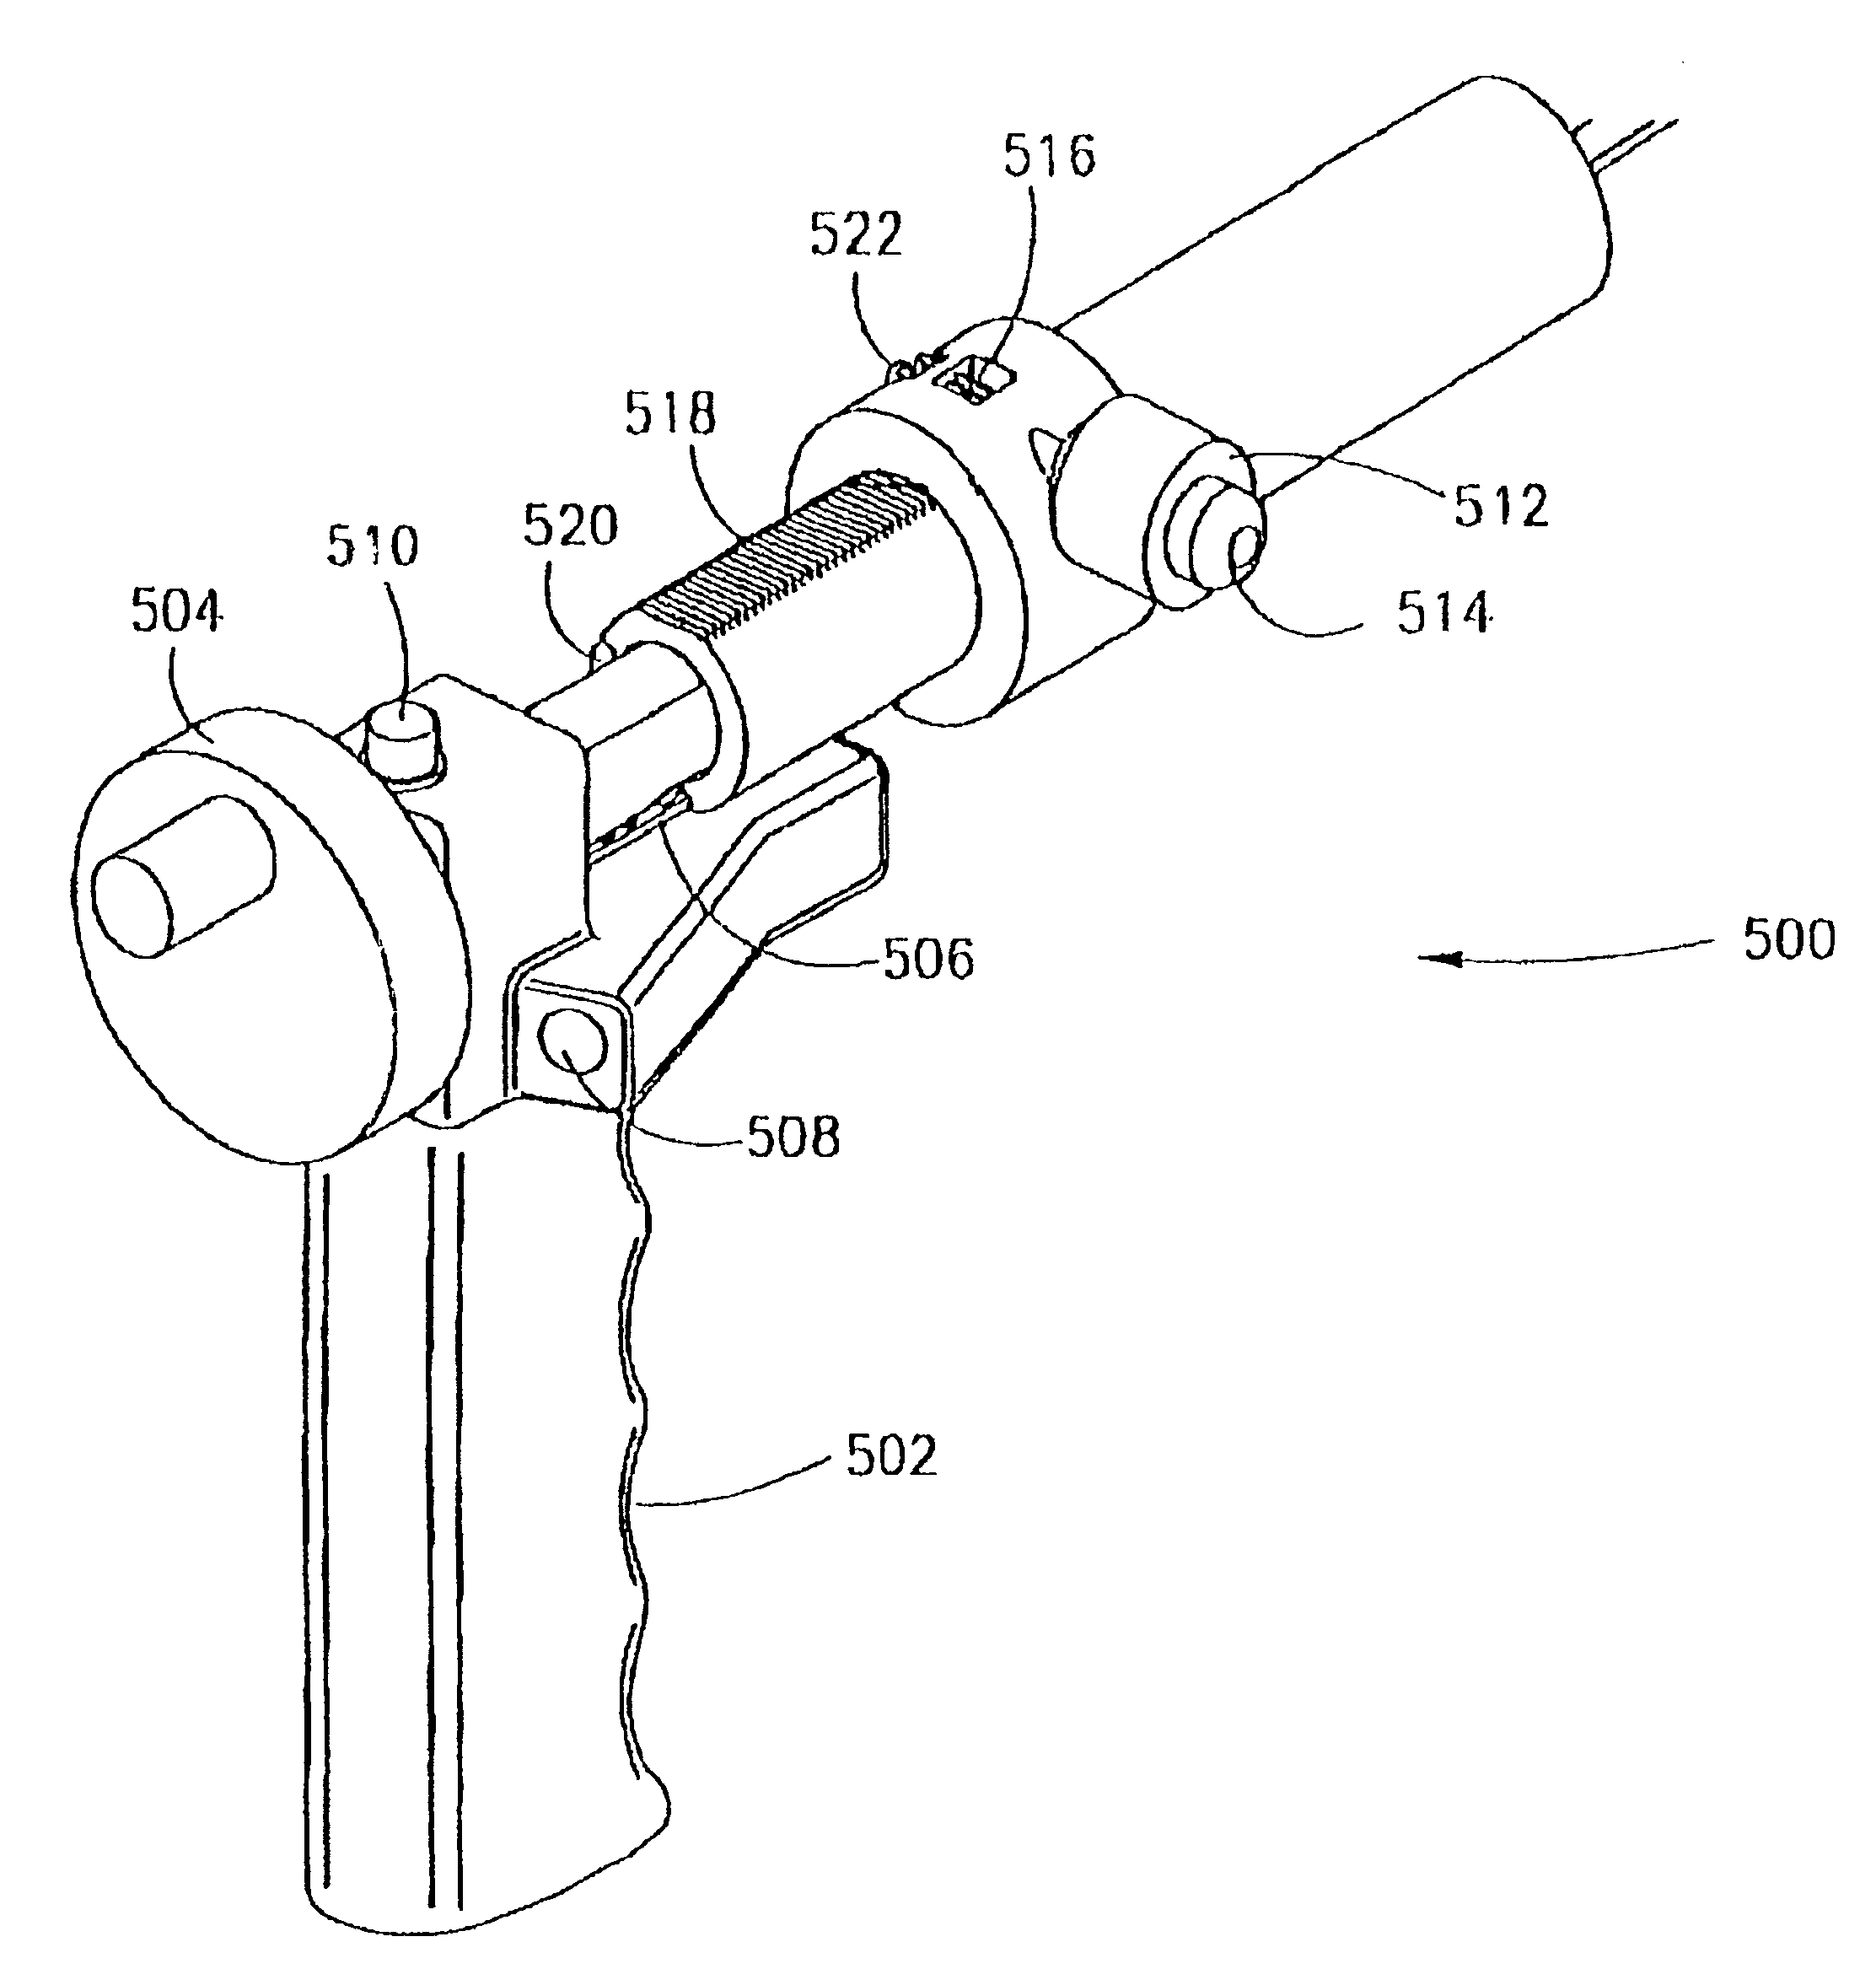 Expandable element delivery system